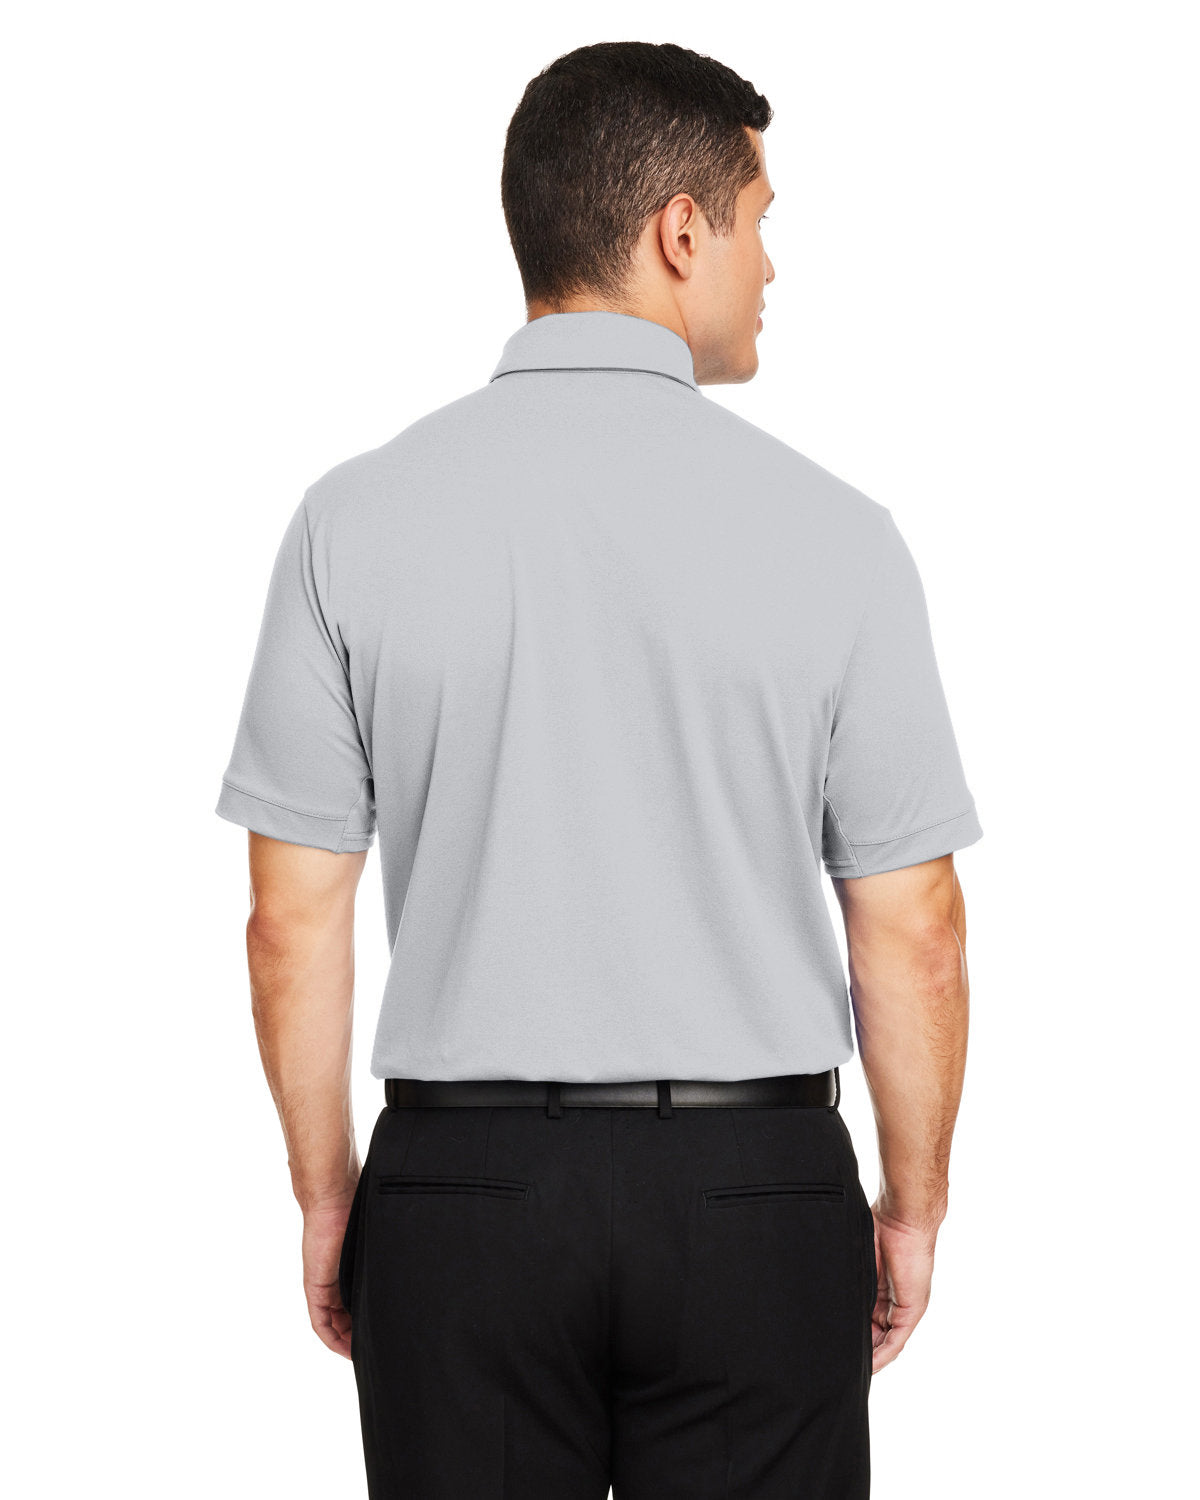 Under Armour Mens Title Branded Polos, Halo Grey